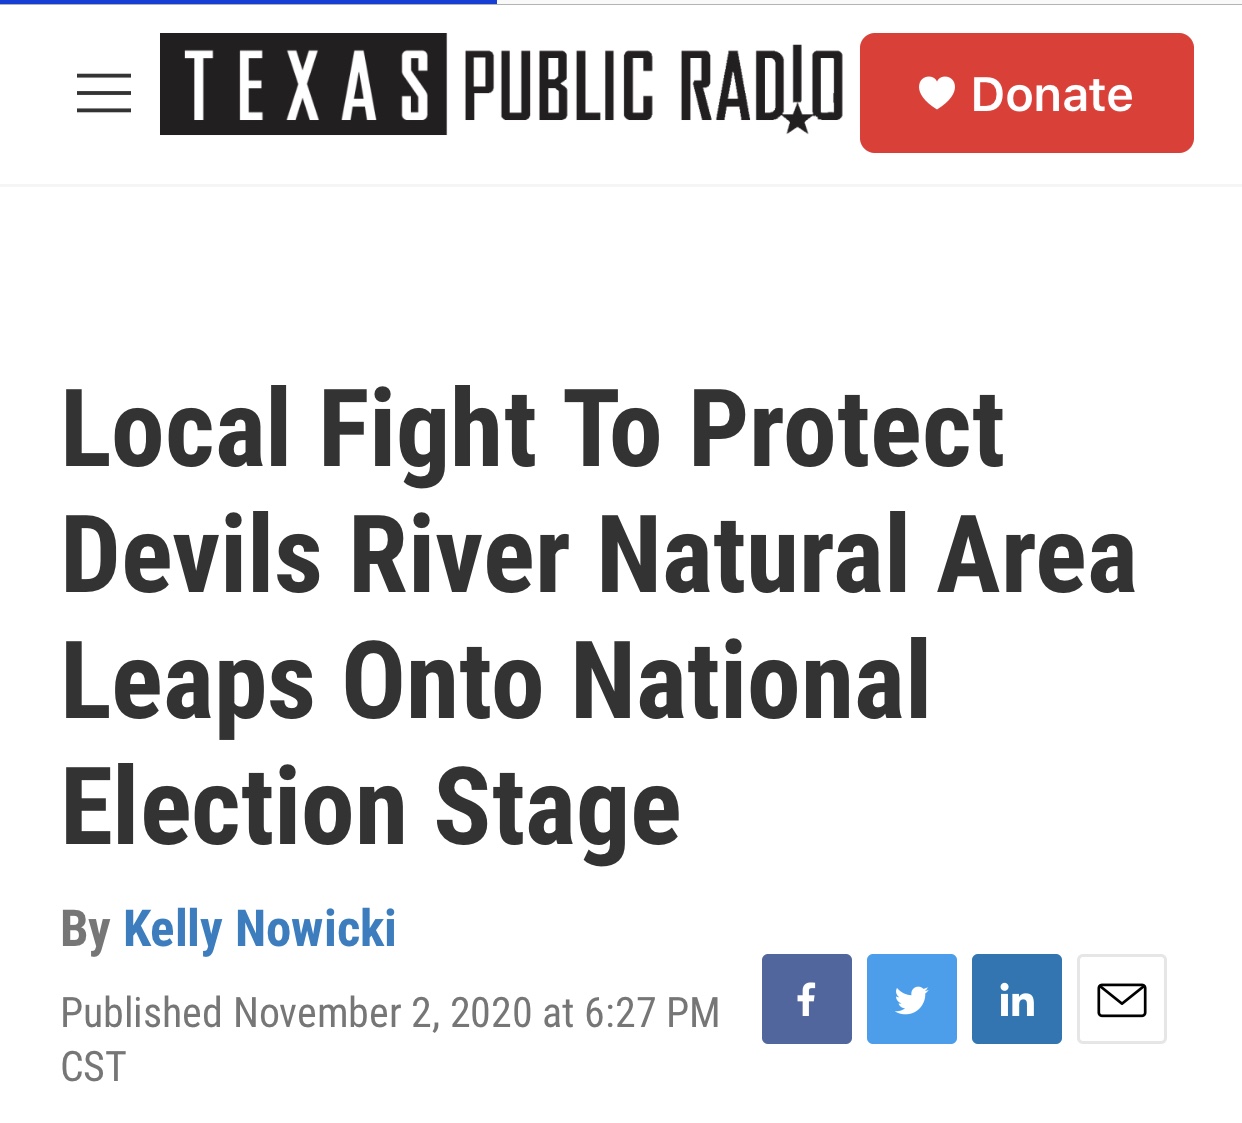 Local Fight To Protect Devils River Natural Area Leaps Onto National Election Stage